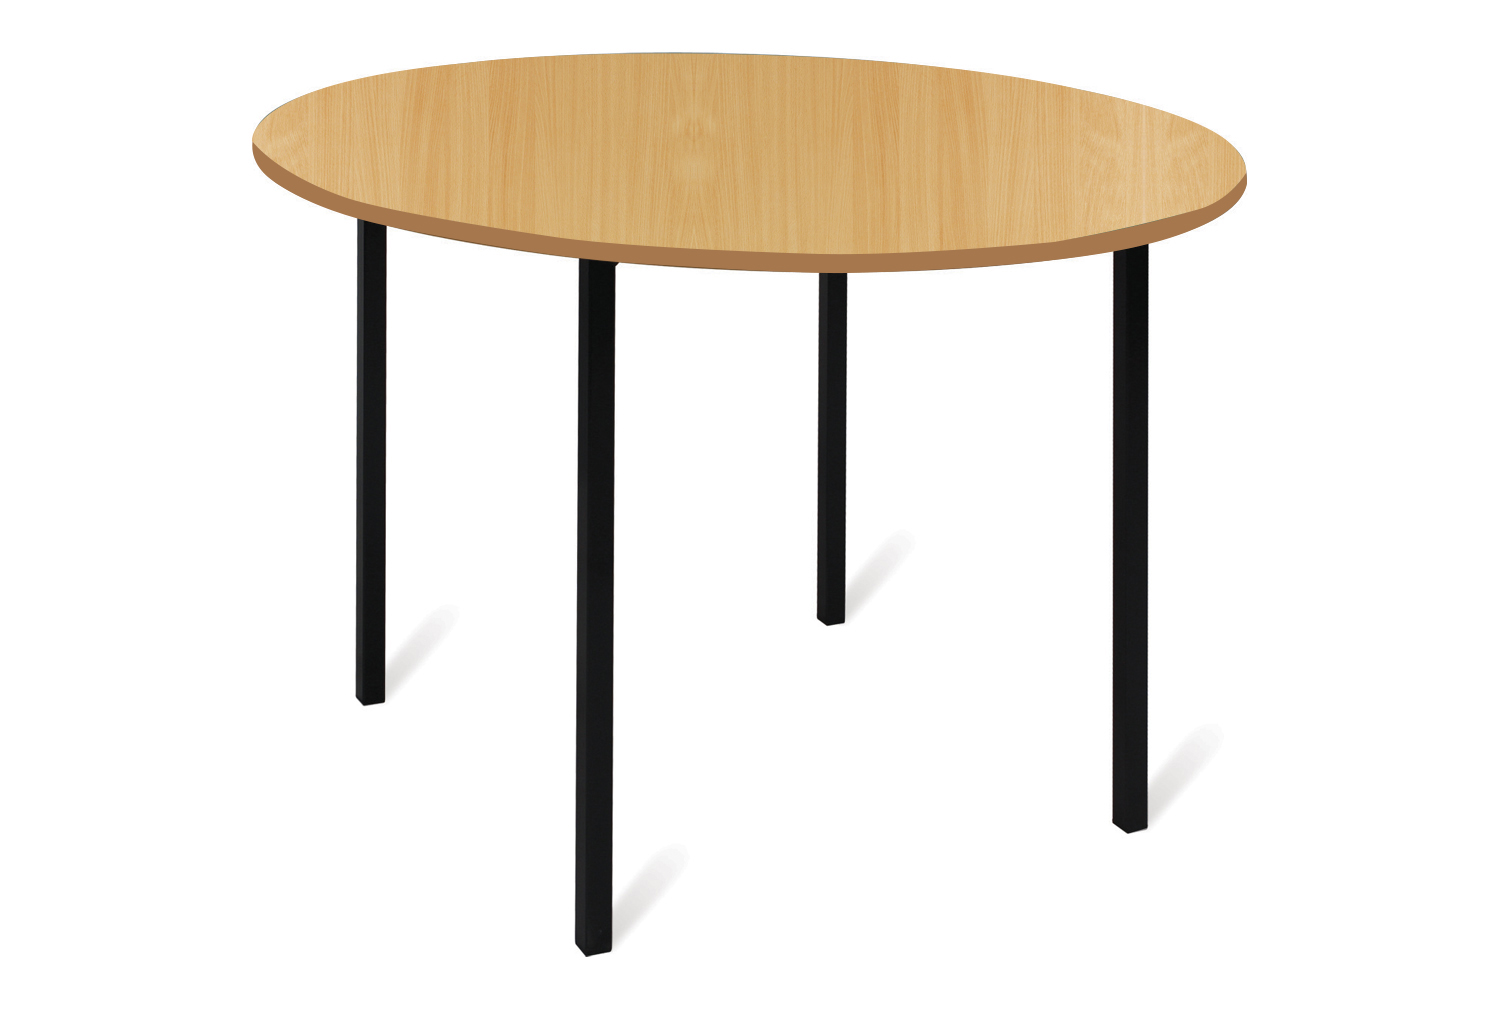 Qty 4 - Educate Fully Welded Circular Classroom Tables 14+ Years (MDF Edge), 100diax76h (cm), Black Frame, Beech Top, MDF Edge